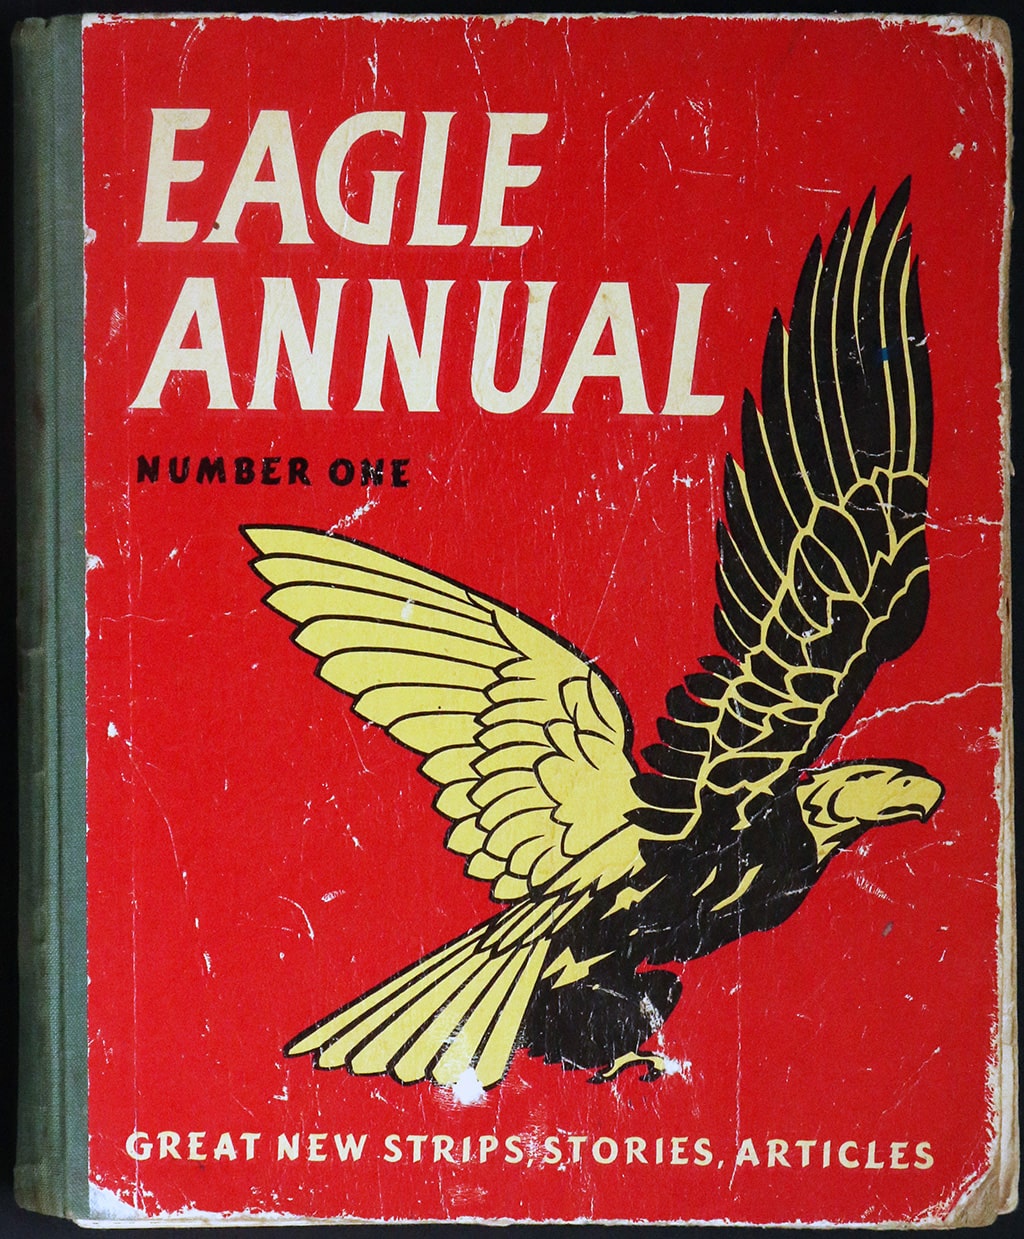 Front cover of Eagle Annual number one. The cover has a red background with an illustration of an eagle.